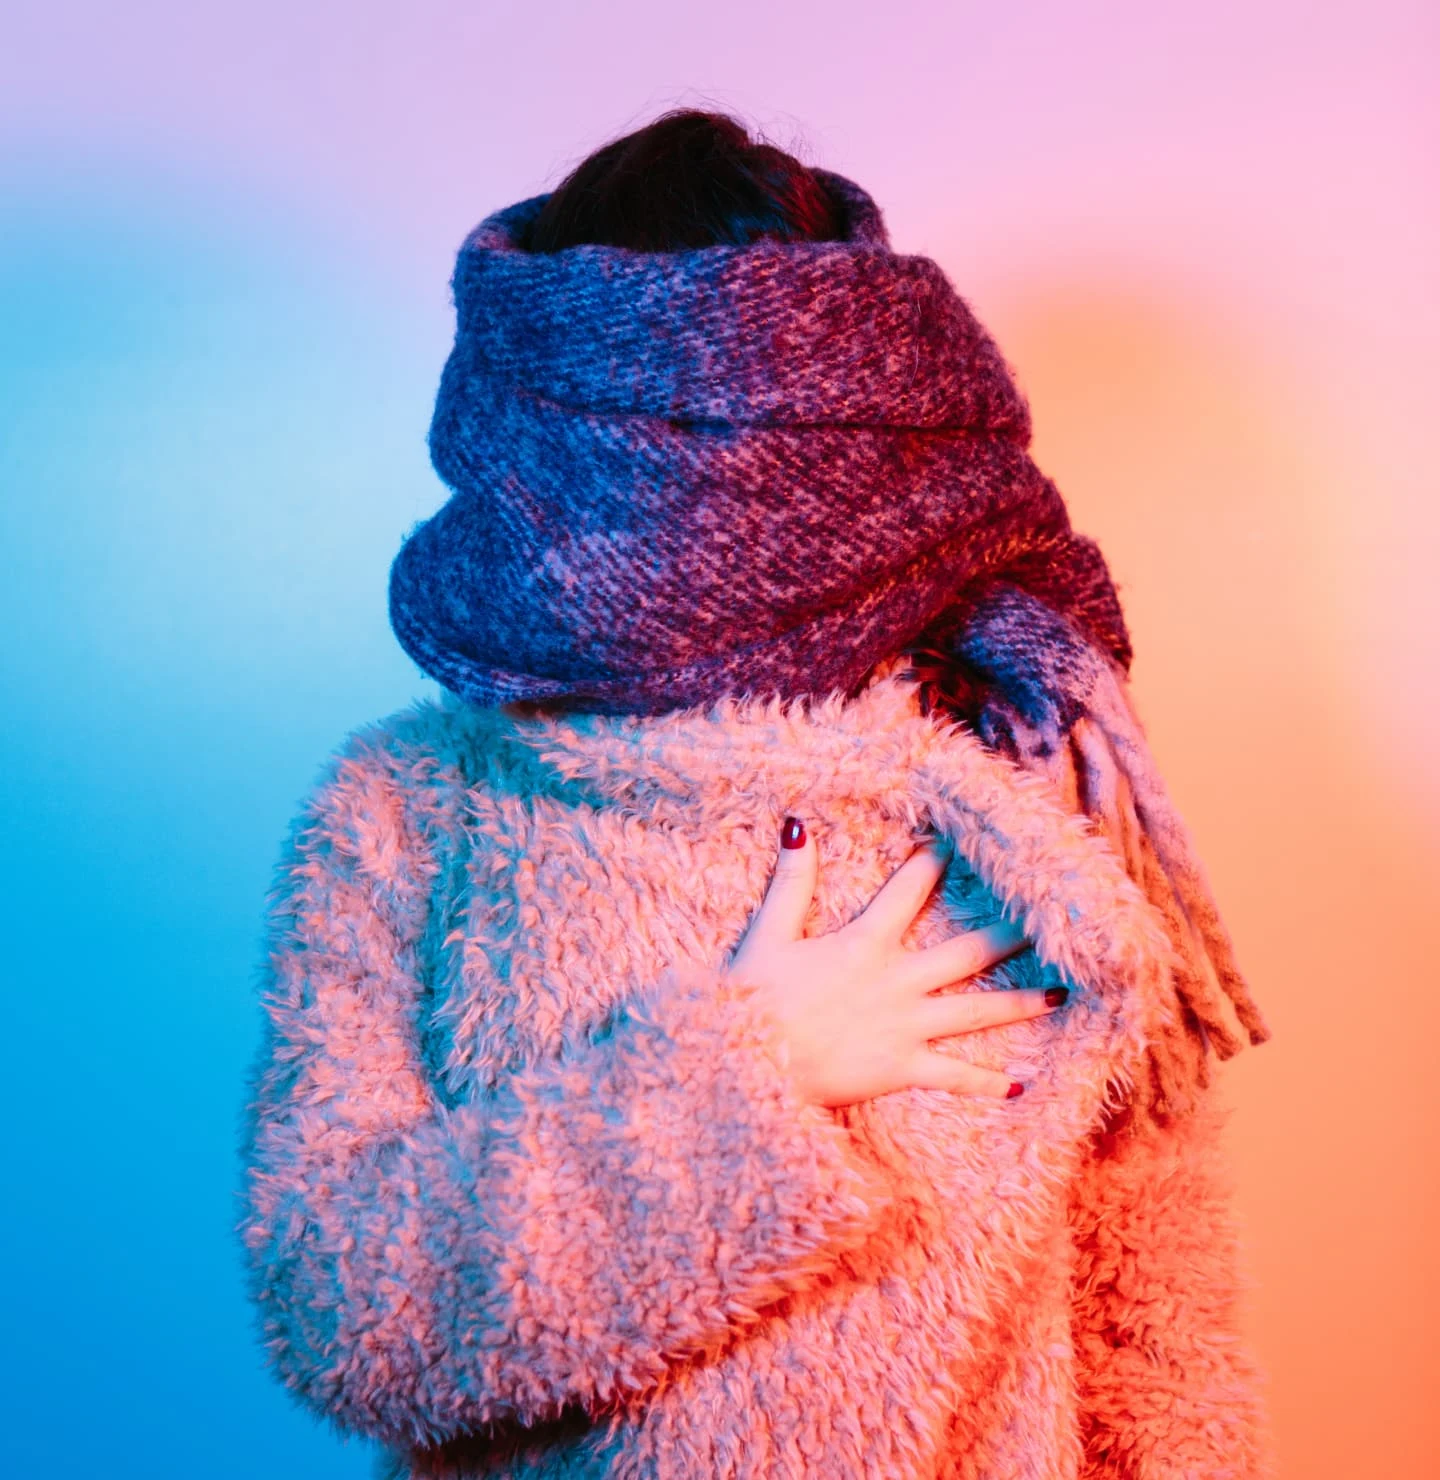 Woman wrapping herself in a scarf and sweater